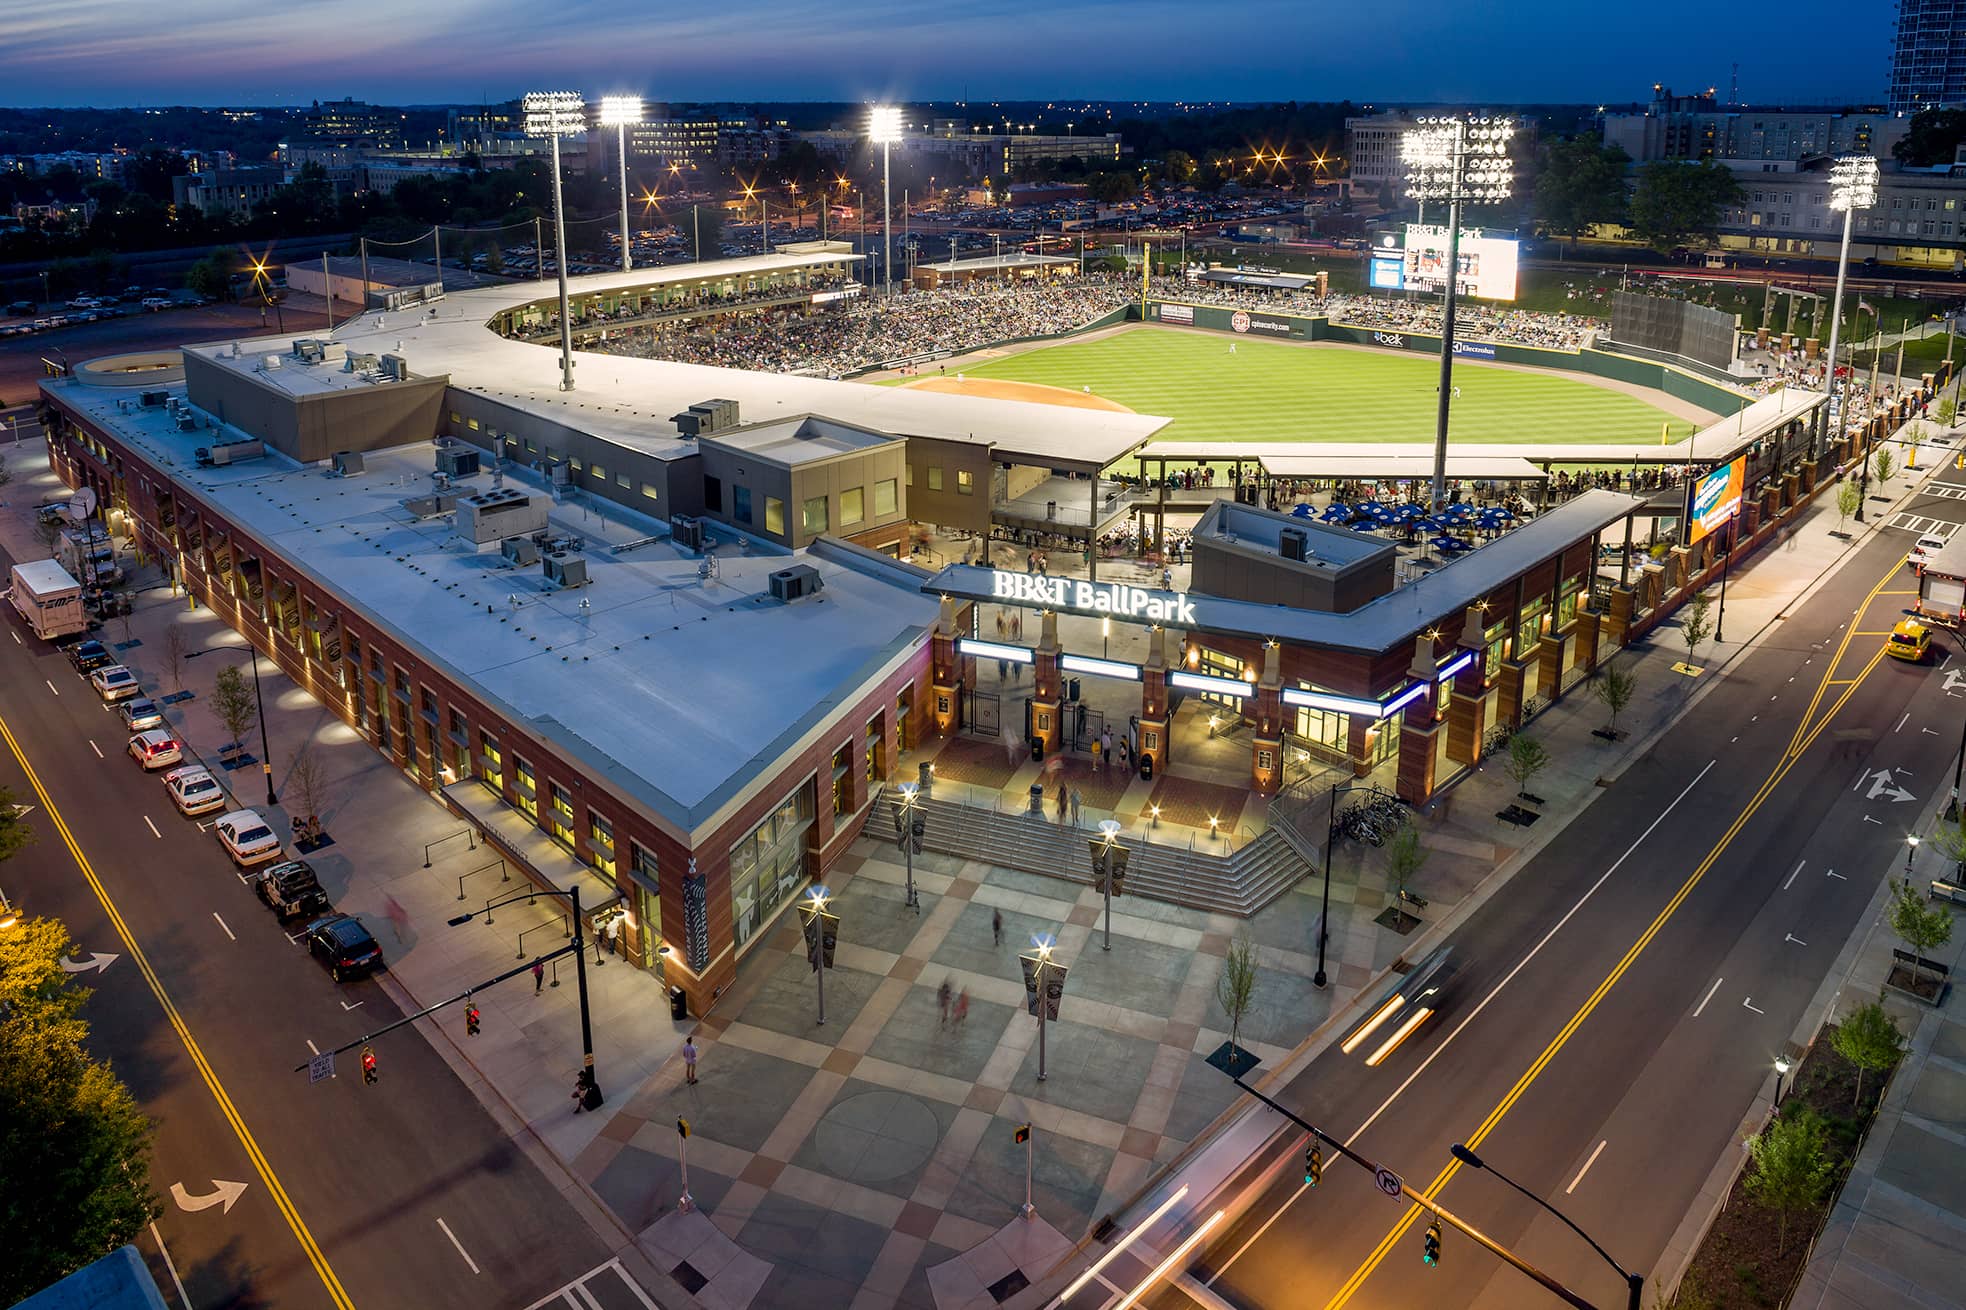 Kimley-Horn performed landscape architecture, streetscape, and urban corridor design for BB&T Ballpark, home of the Charlotte Knights AAA baseball team.